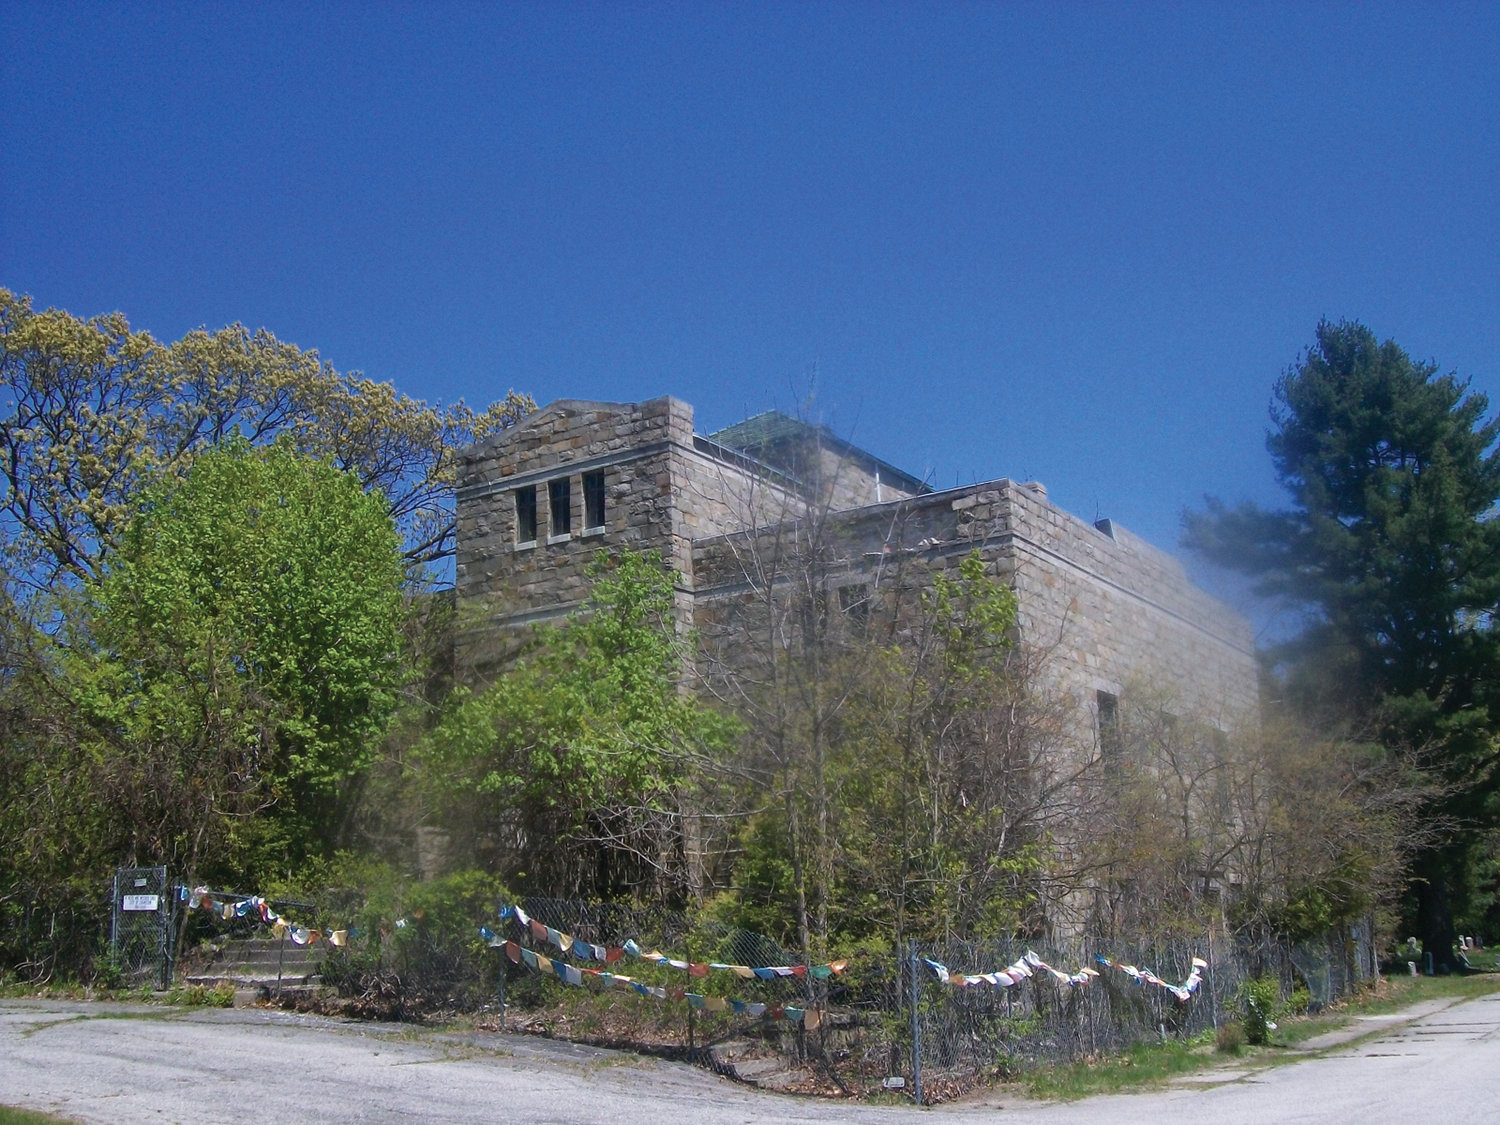 RESTING PLACE OF HUNDREDS: The Roger Williams Mausoleum, completed in 1926 by Thomas Cullinan, has fallen into severe disrepair over the course of many decades.